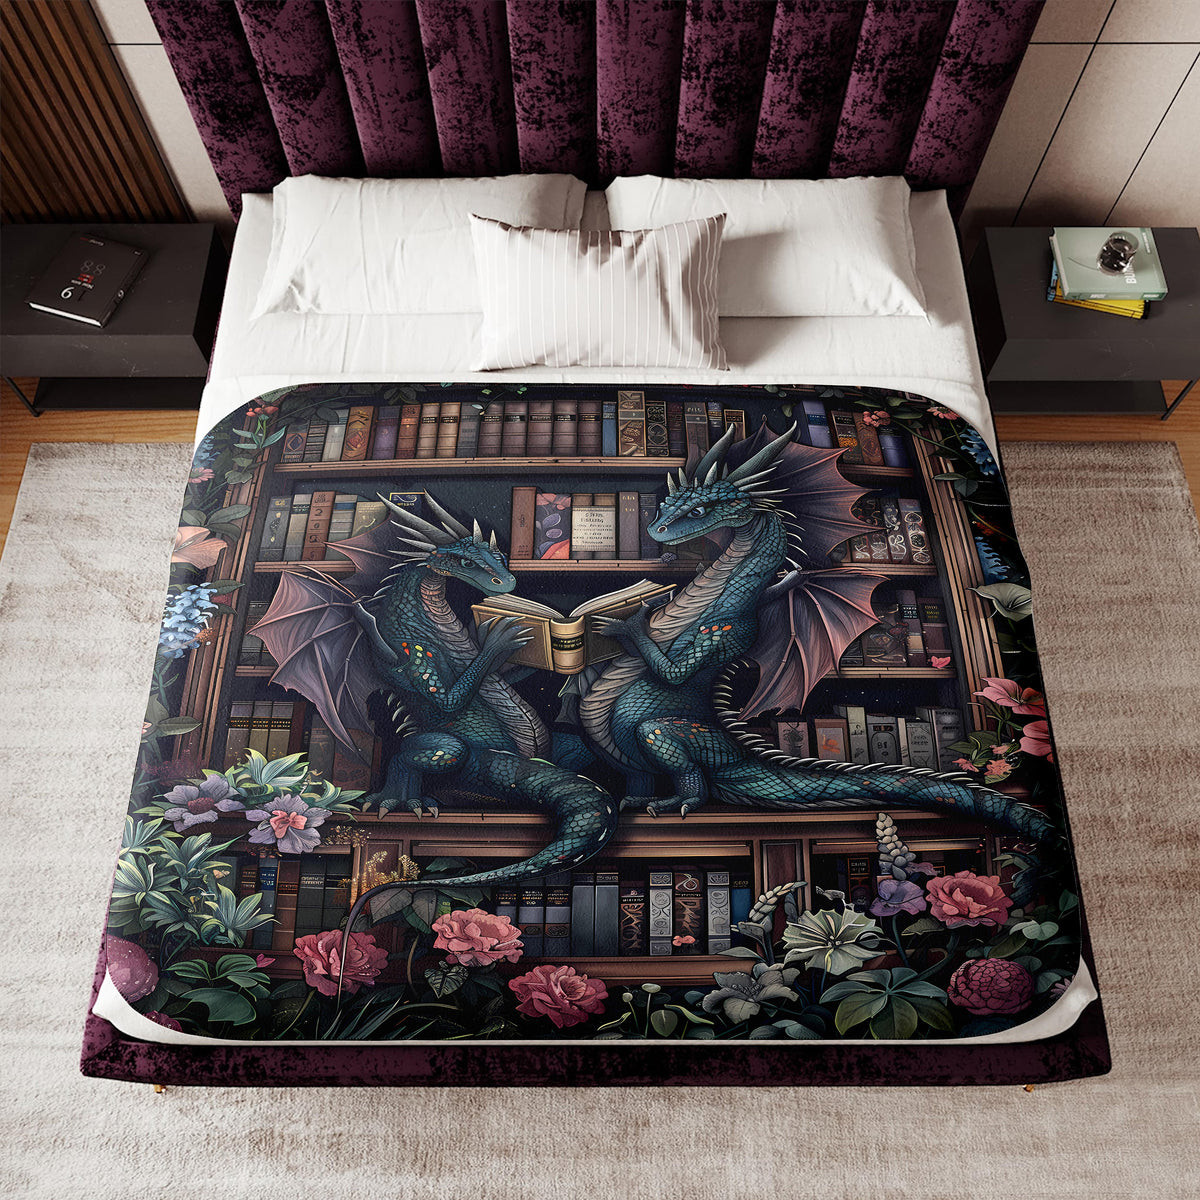 a bed with a dragon and bookshelf on it